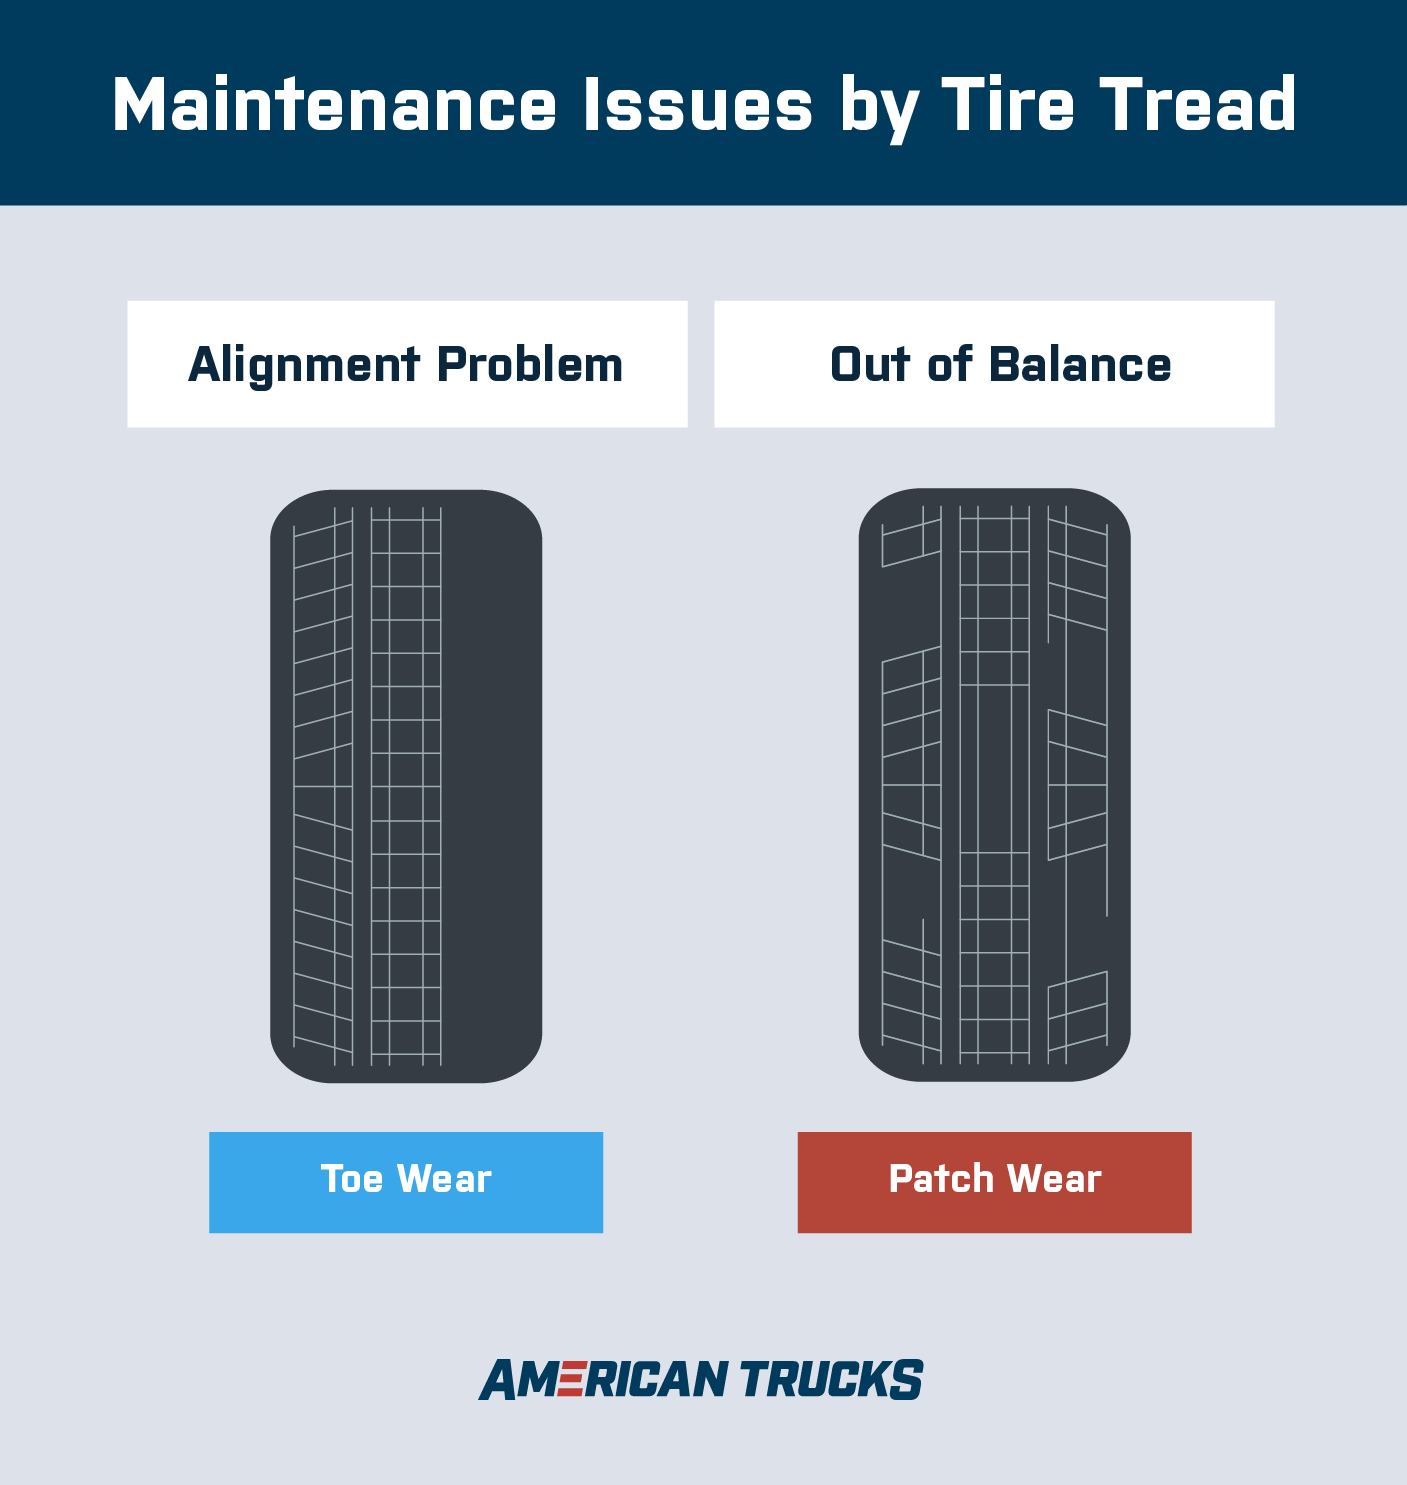 Graphic labeled "Maintenance issues by tire tread" with an illustration of a tire with toe wear labeled "alignment problem" and one with patch wear labeled "out of balance".